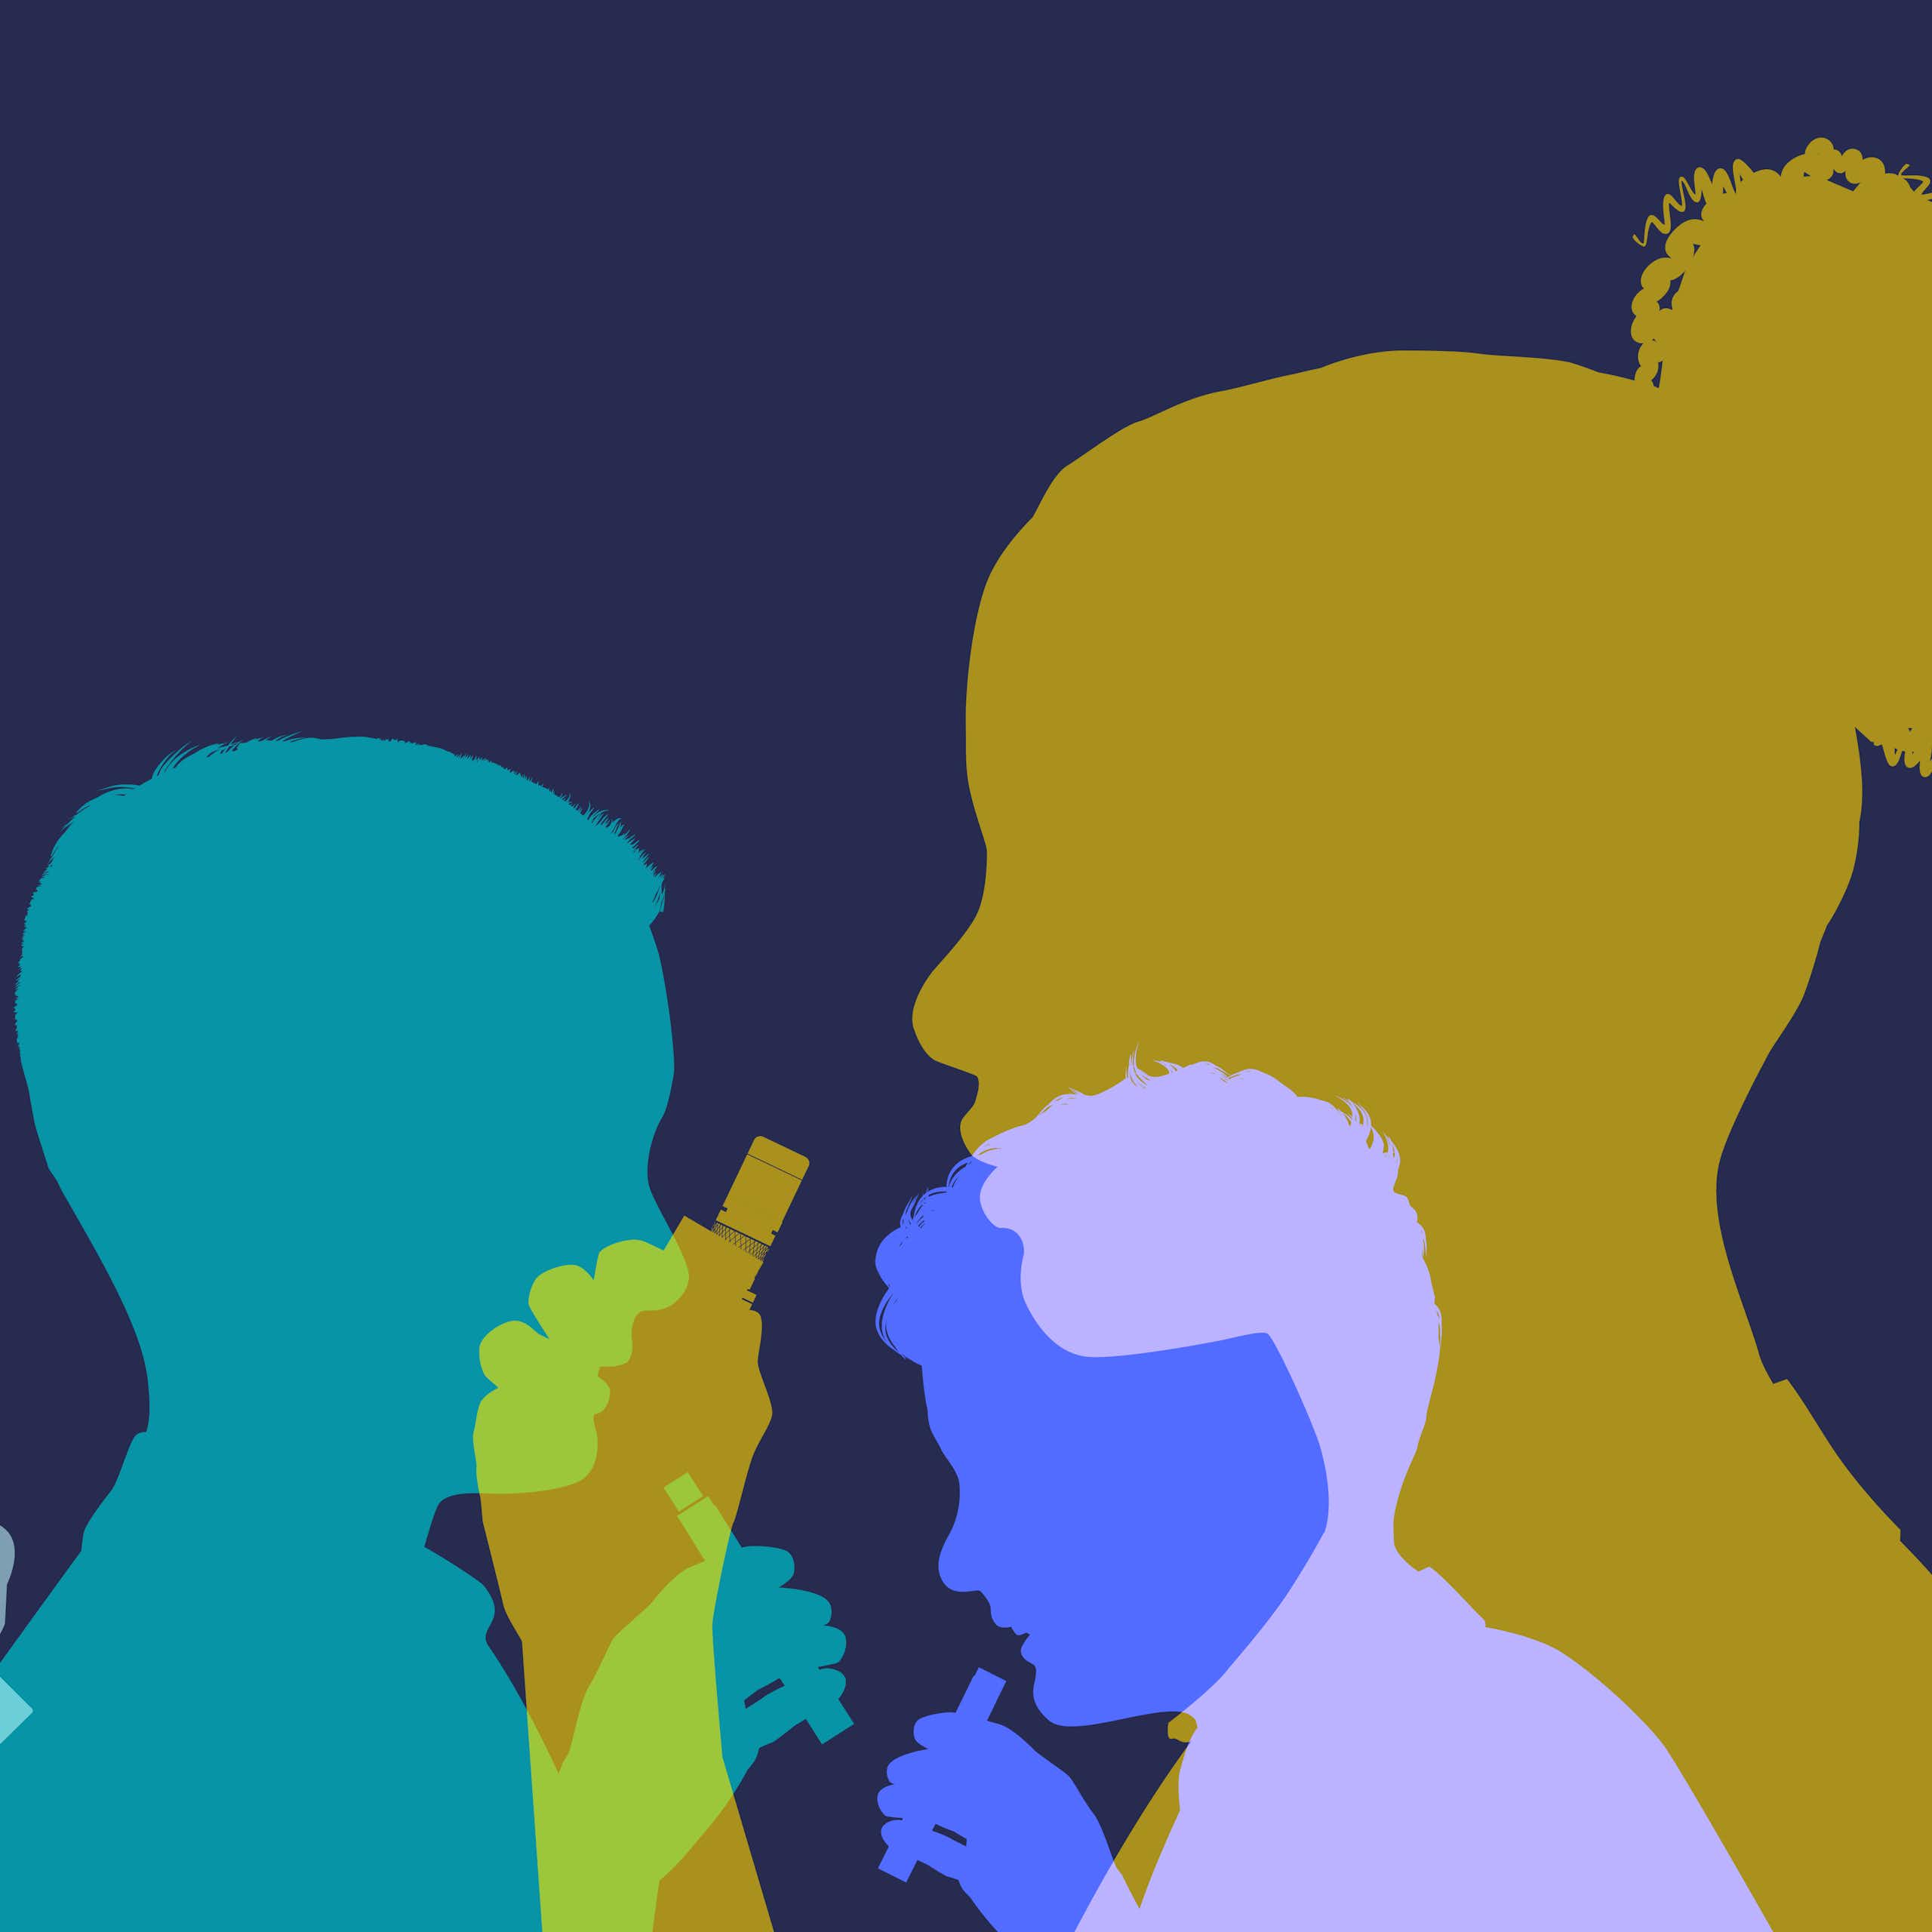 An illustration of silhouettes of children smoking and vaping.